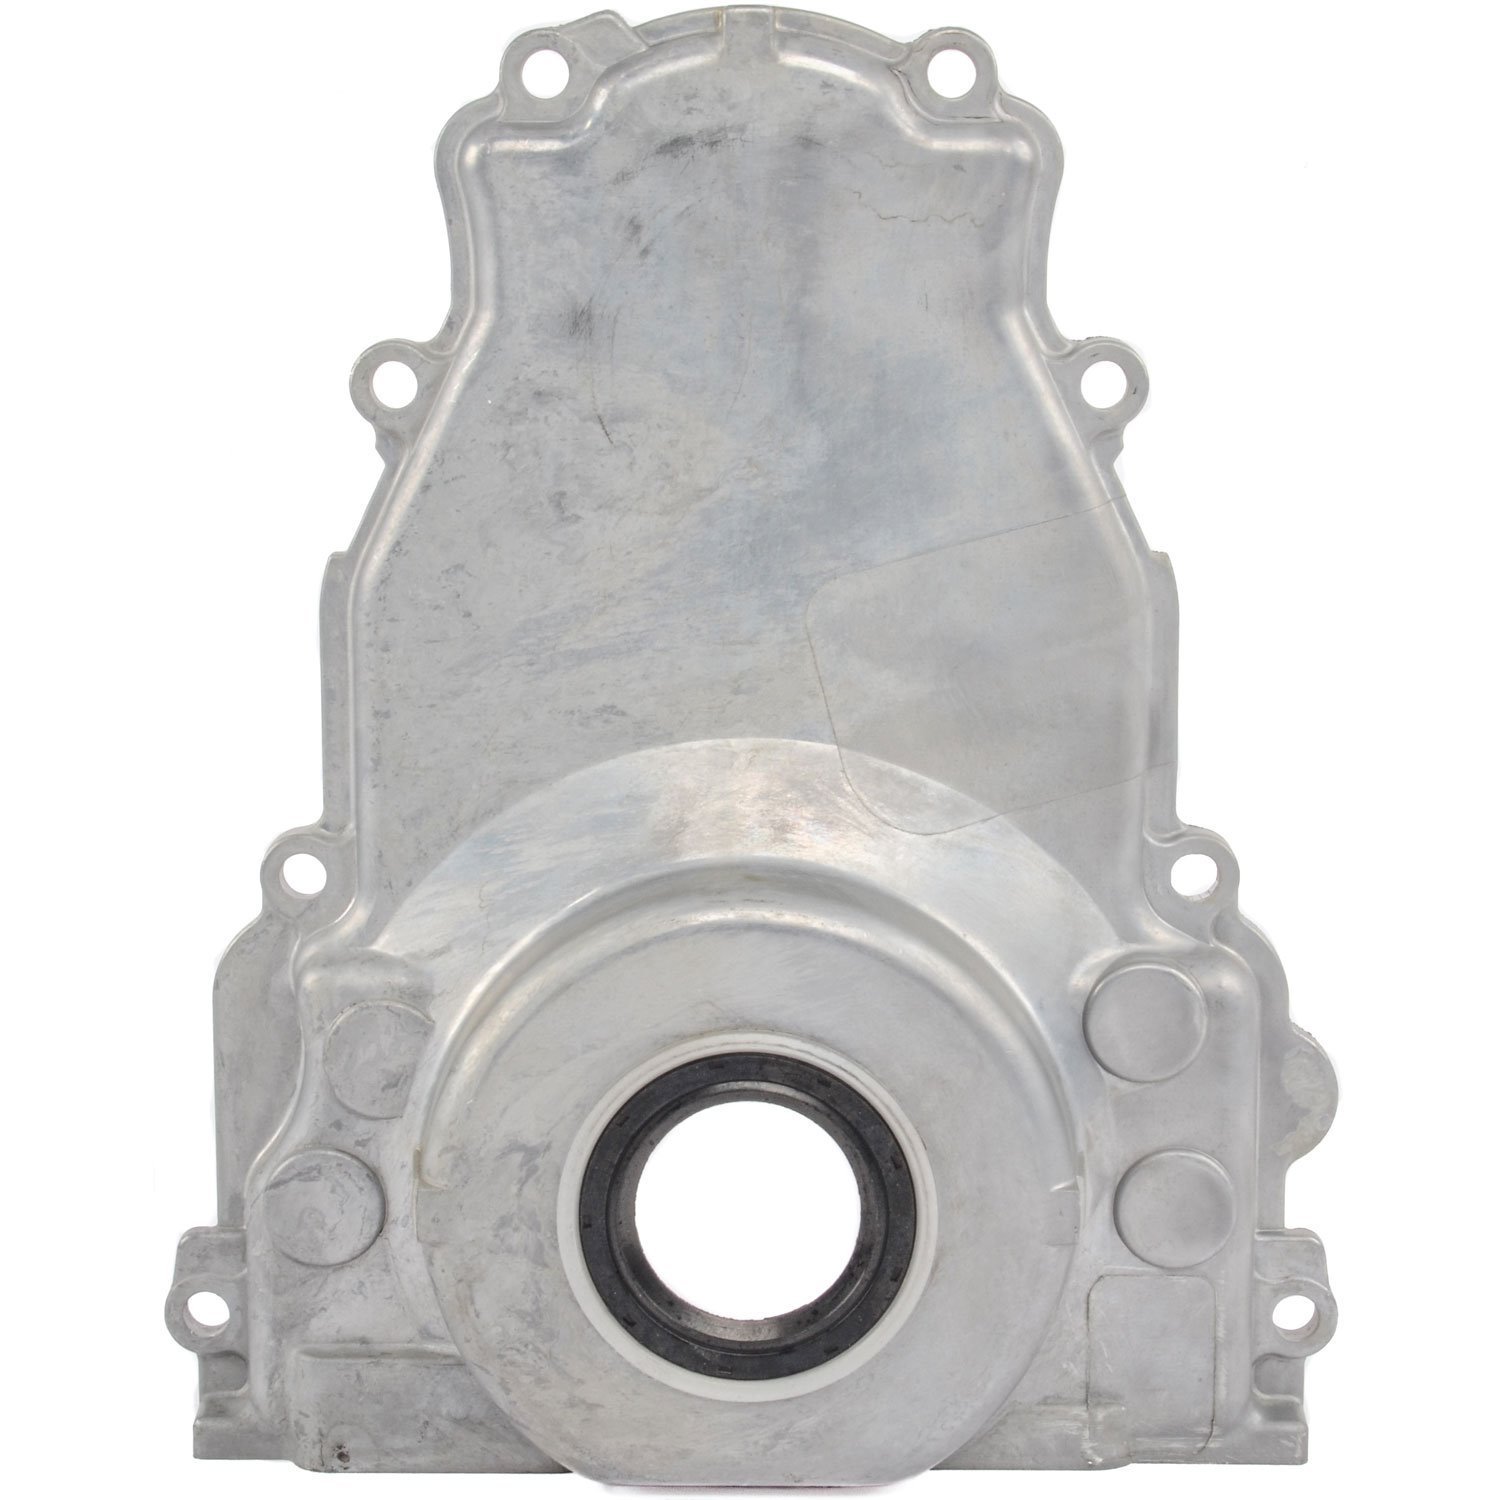 Timing Cover for GM LS1 and LS6